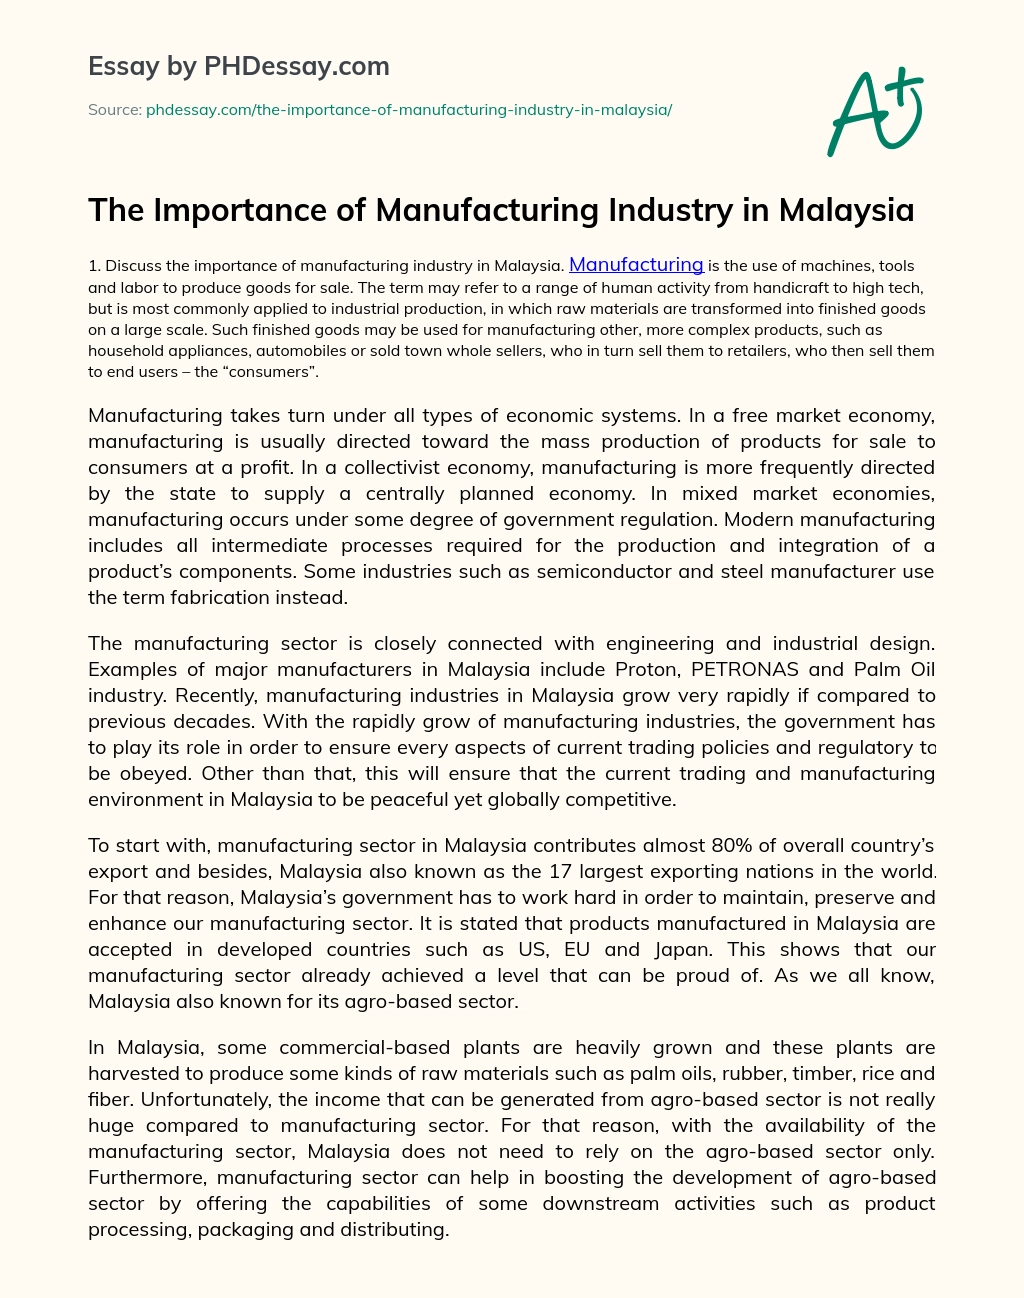 The Importance of Manufacturing Industry in Malaysia essay